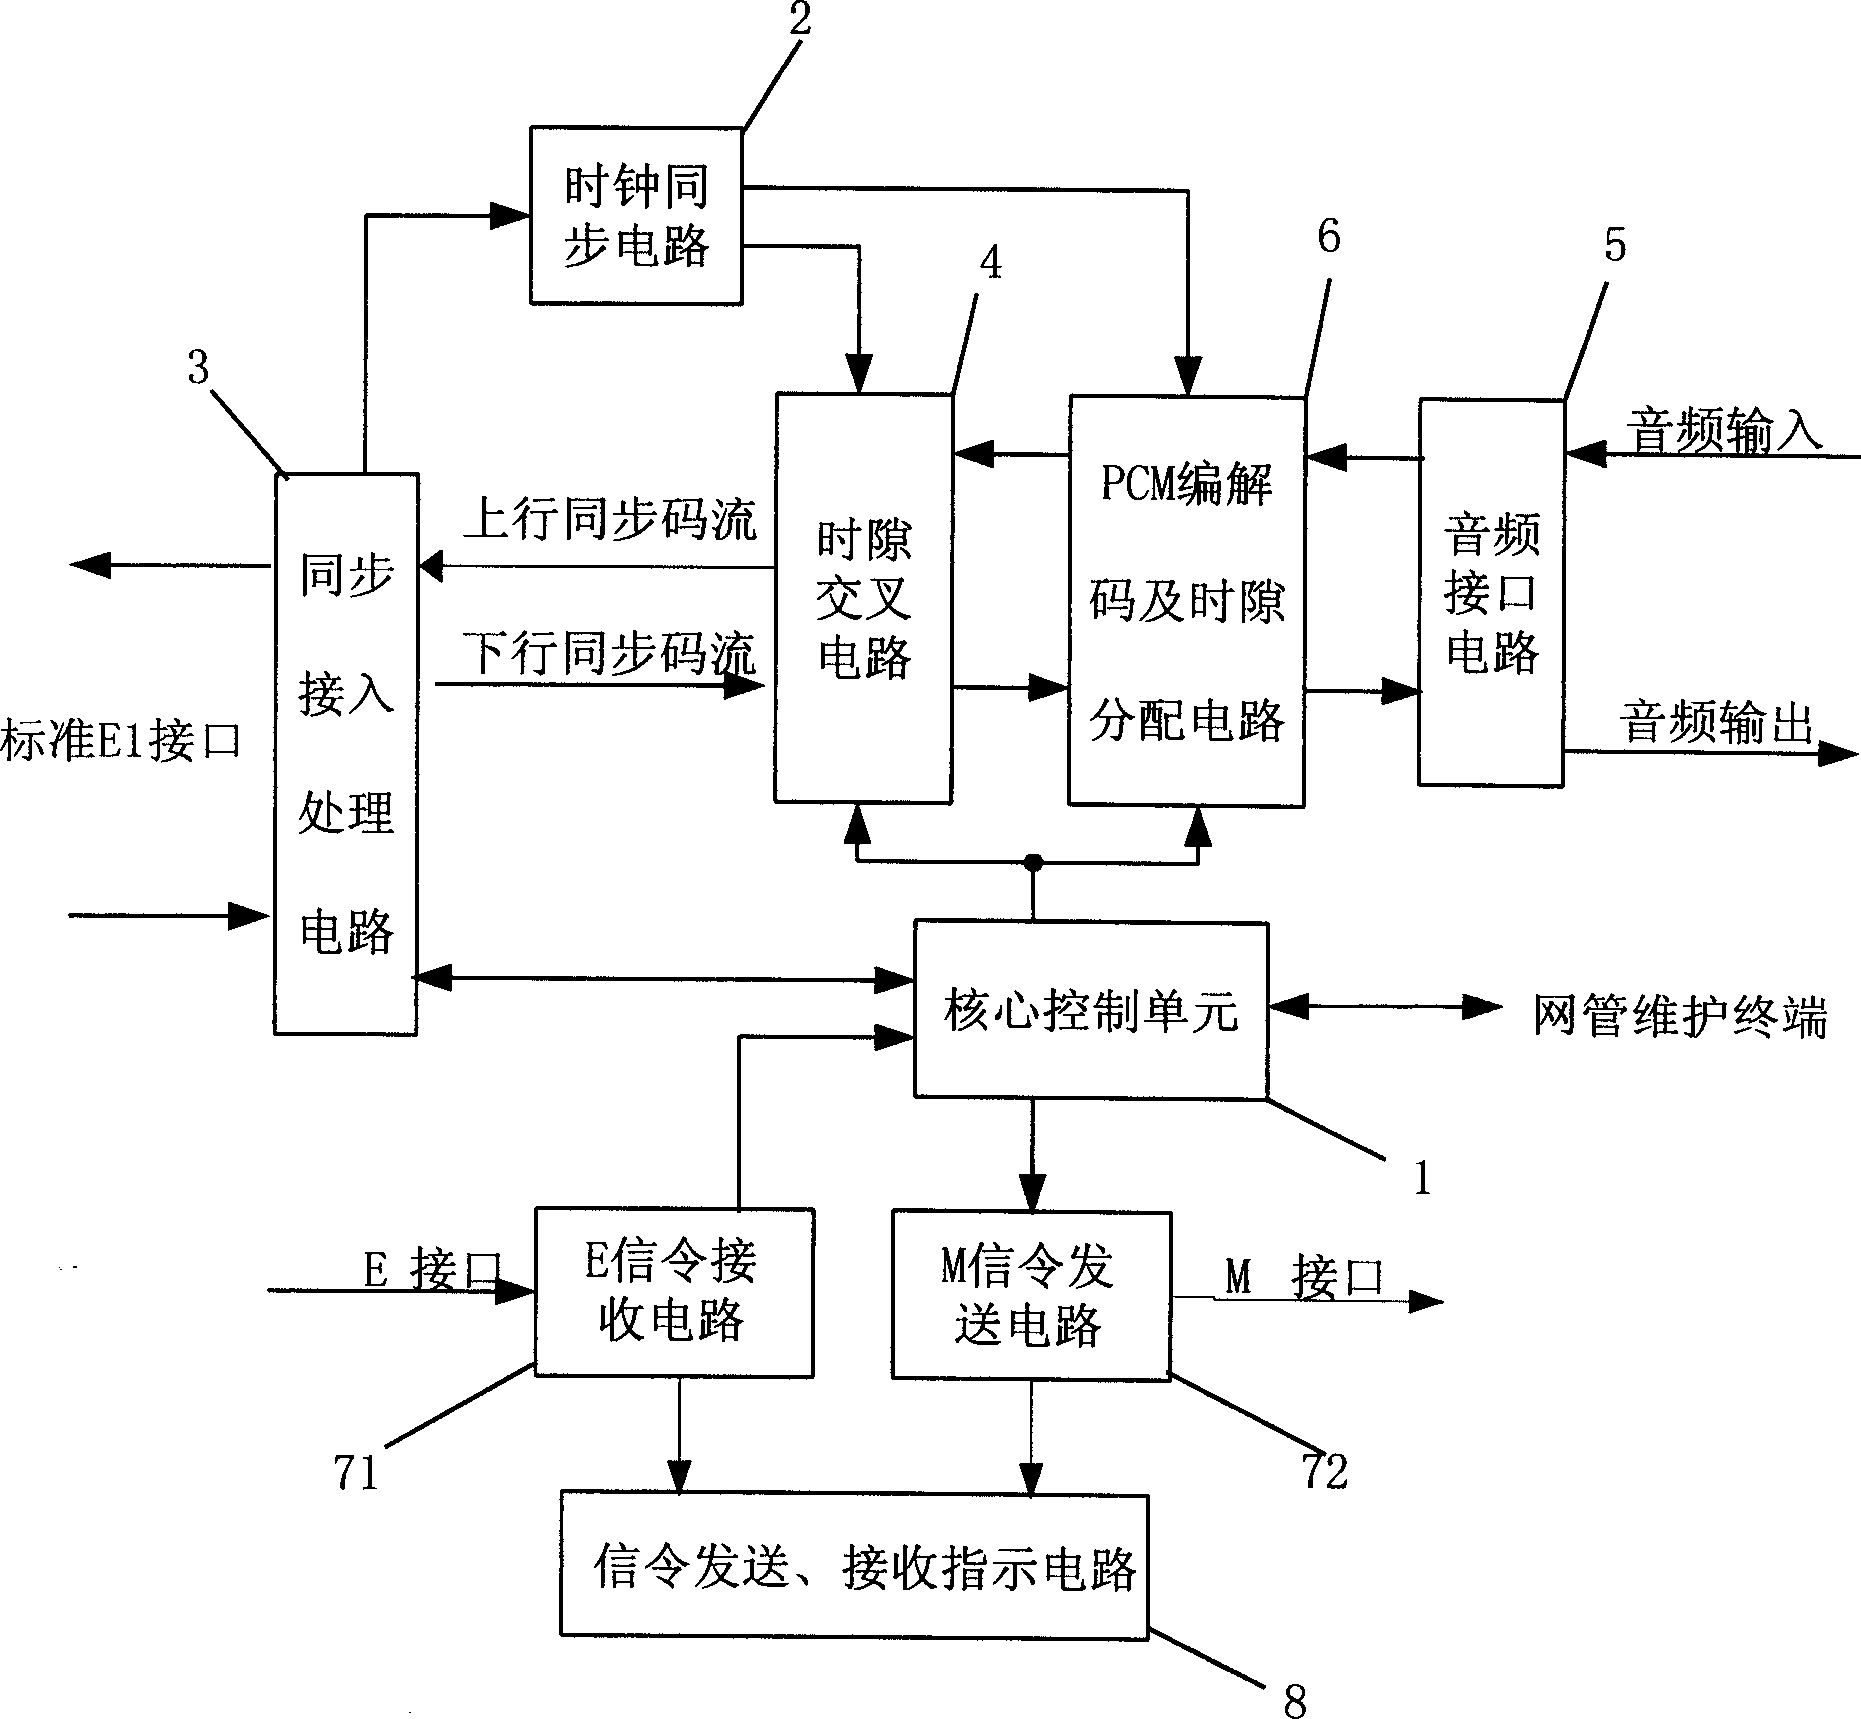 Rolay interface device based on synchronous digital transmission system